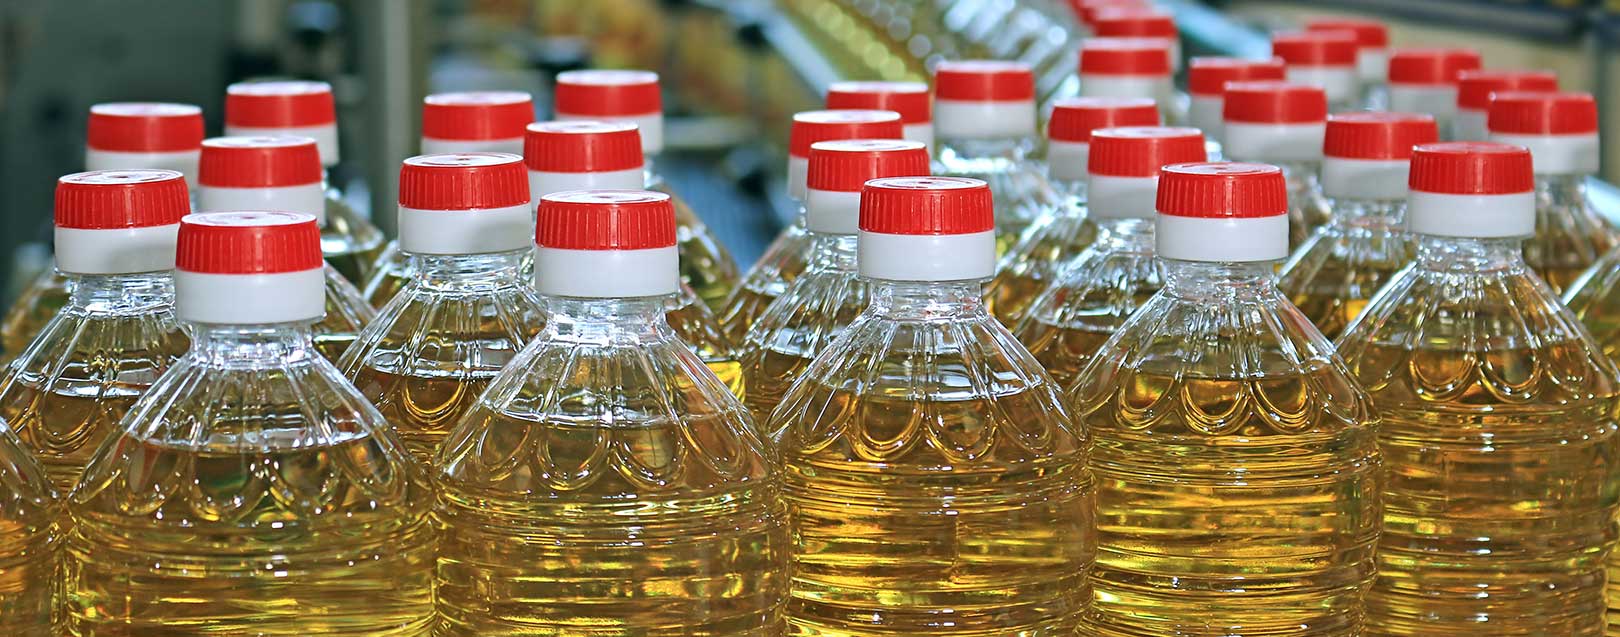 Palm oil imports see a sharp rise in India